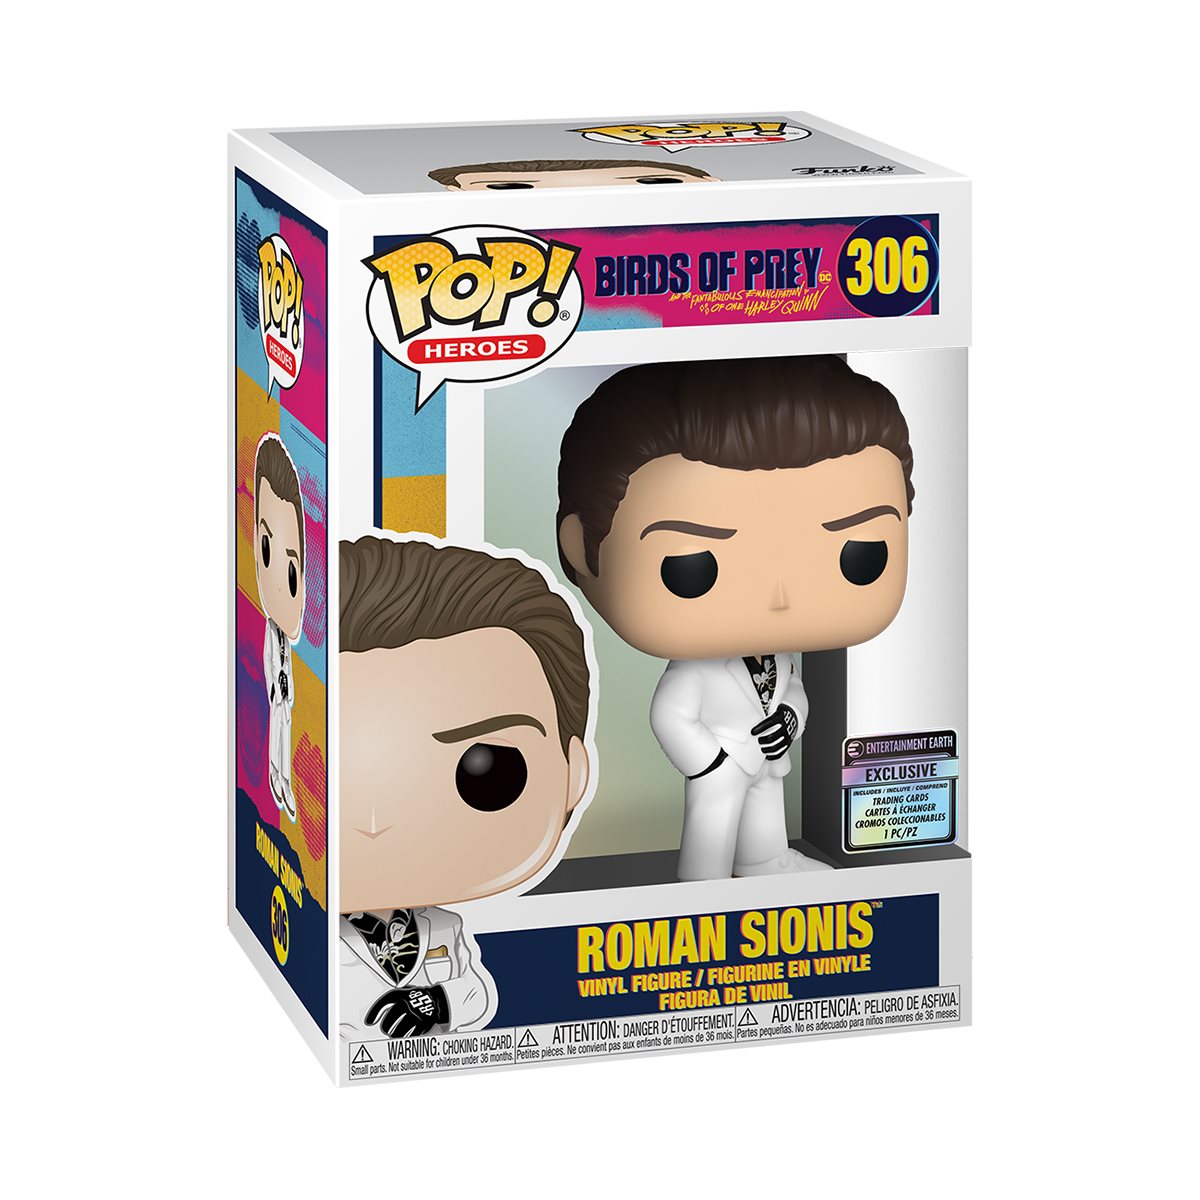 Birds of Prey Roman Sionis Pop! Vinyl Figure with Collectible Card -  Entertainment Earth Exclusive